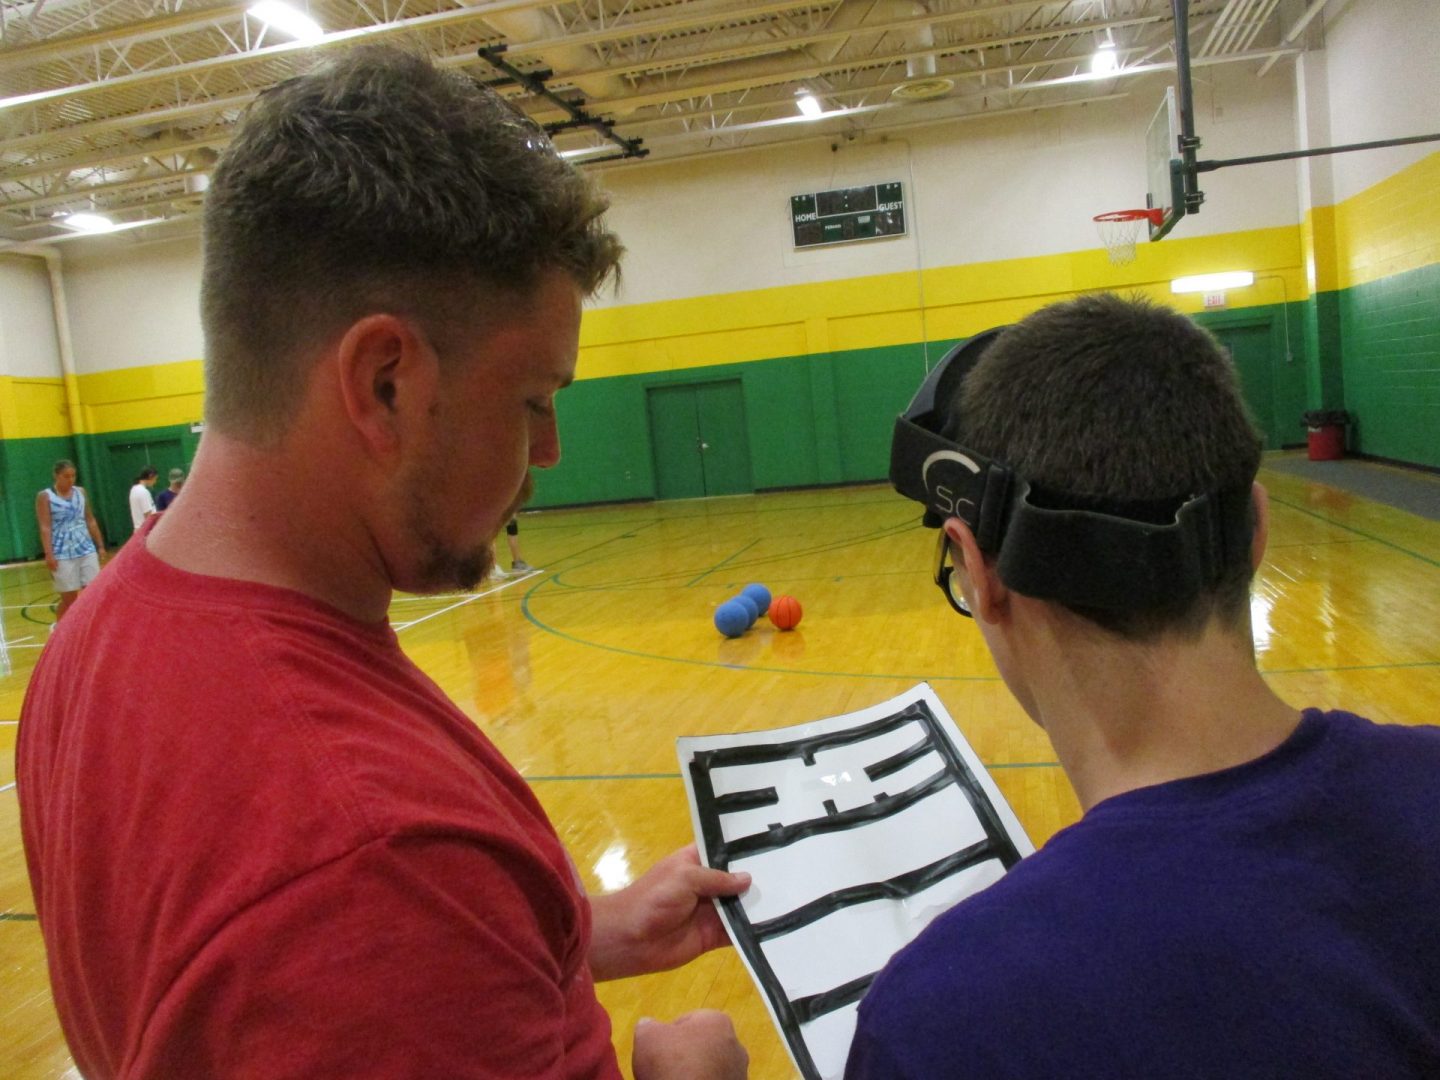 Athlete and Coach standing inside a gymnasium. Athlete is holding a tactile map while he and his coach go over the rules and dimensions of the goalball court.